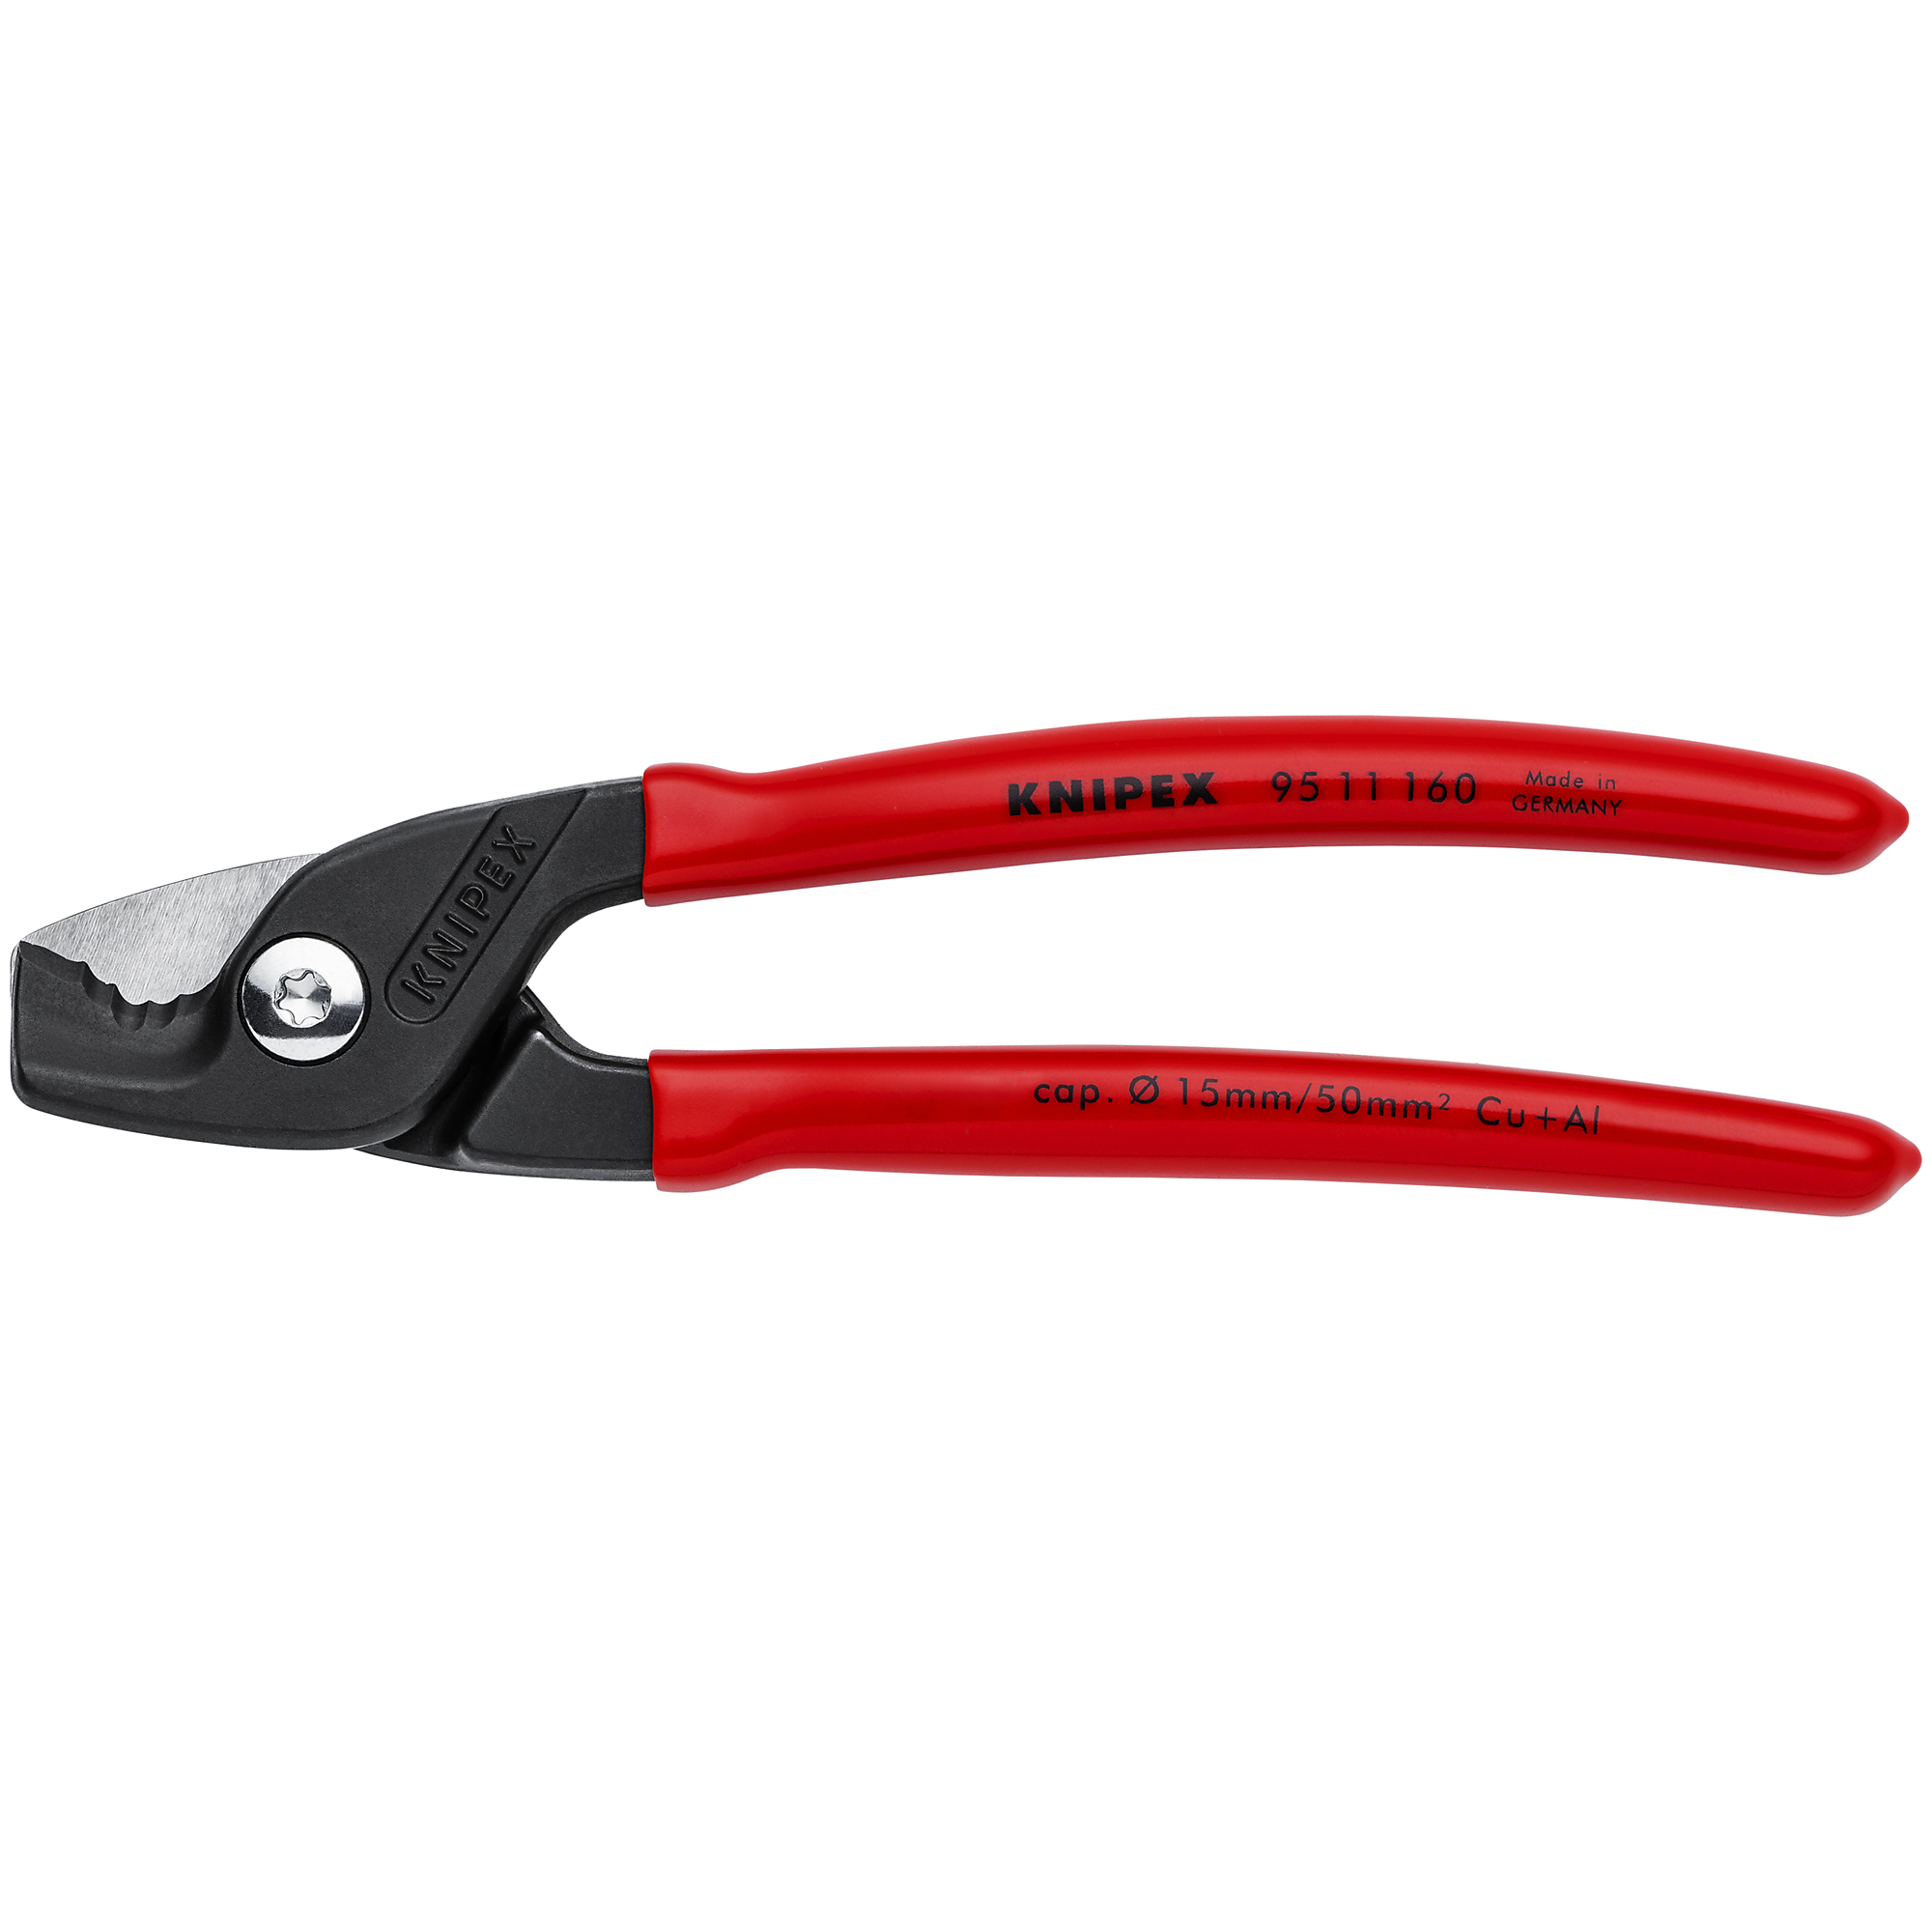 KNIPEX StepCut, StepCut Cable Shears, Plastic coating, Bulk,6.25Inch, Pieces (qty.) 1 Material Steel, Jaw Capacity 0.562 in, Model 95 11 160